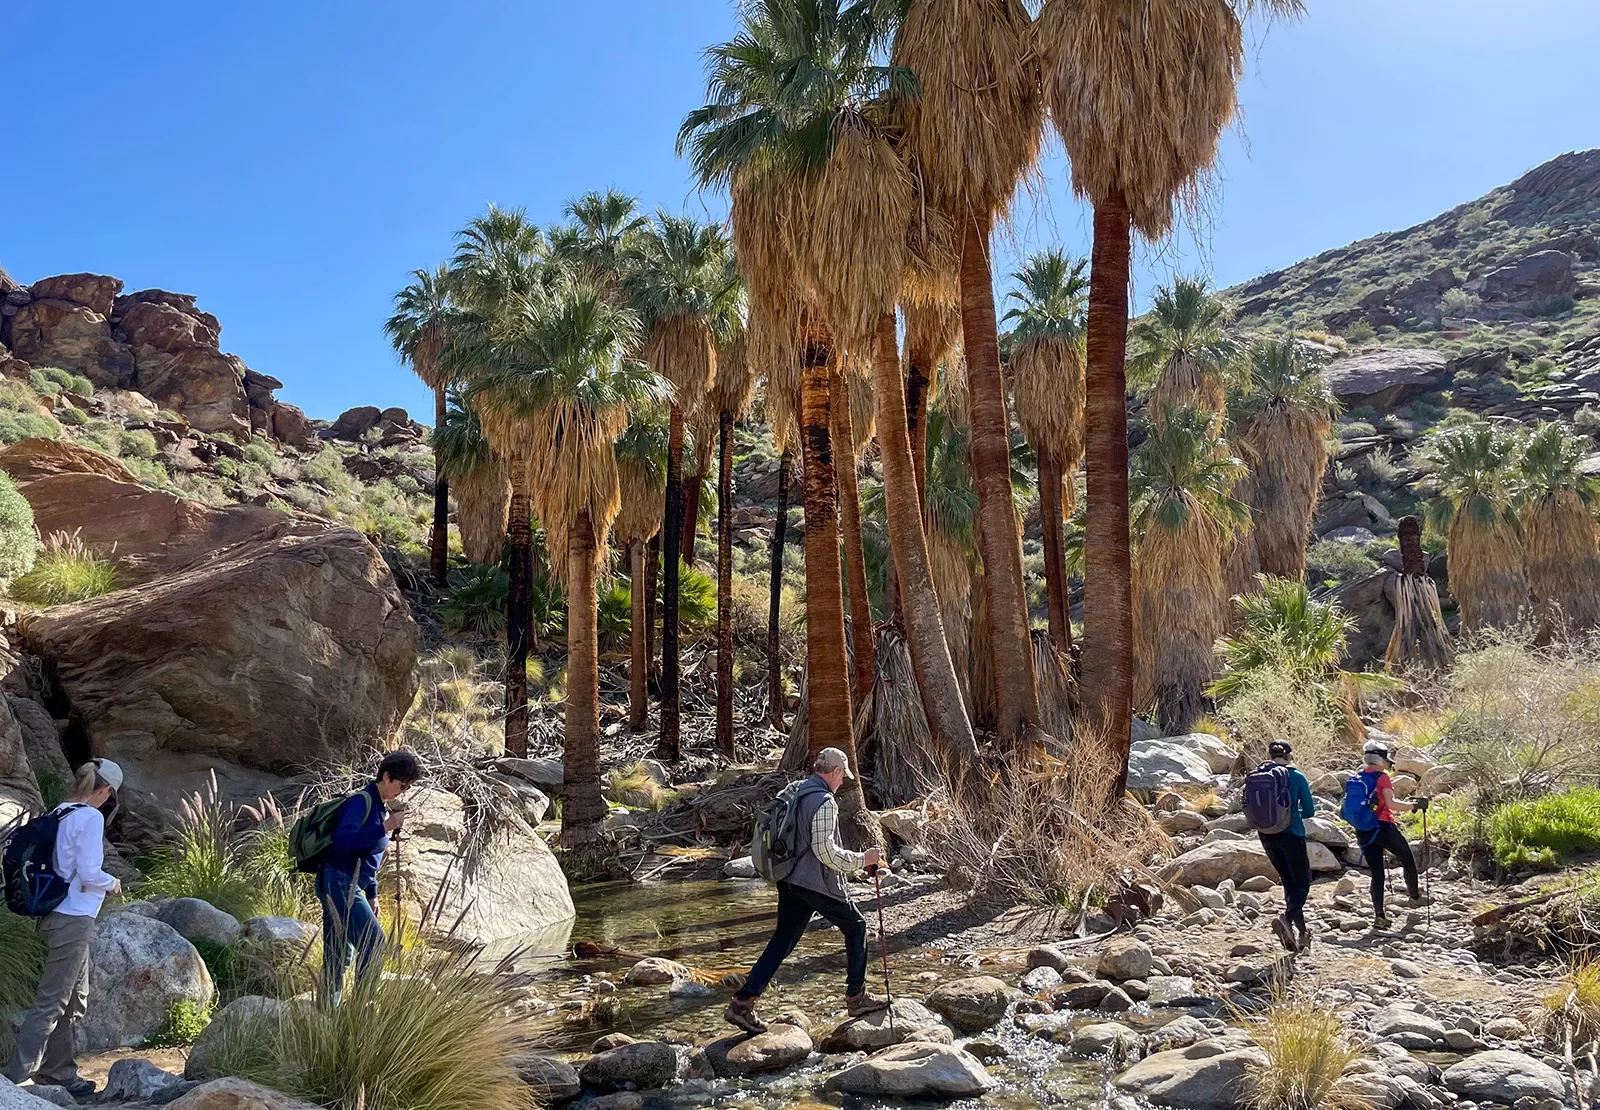 Guests hiking on desert trail, palms in background.